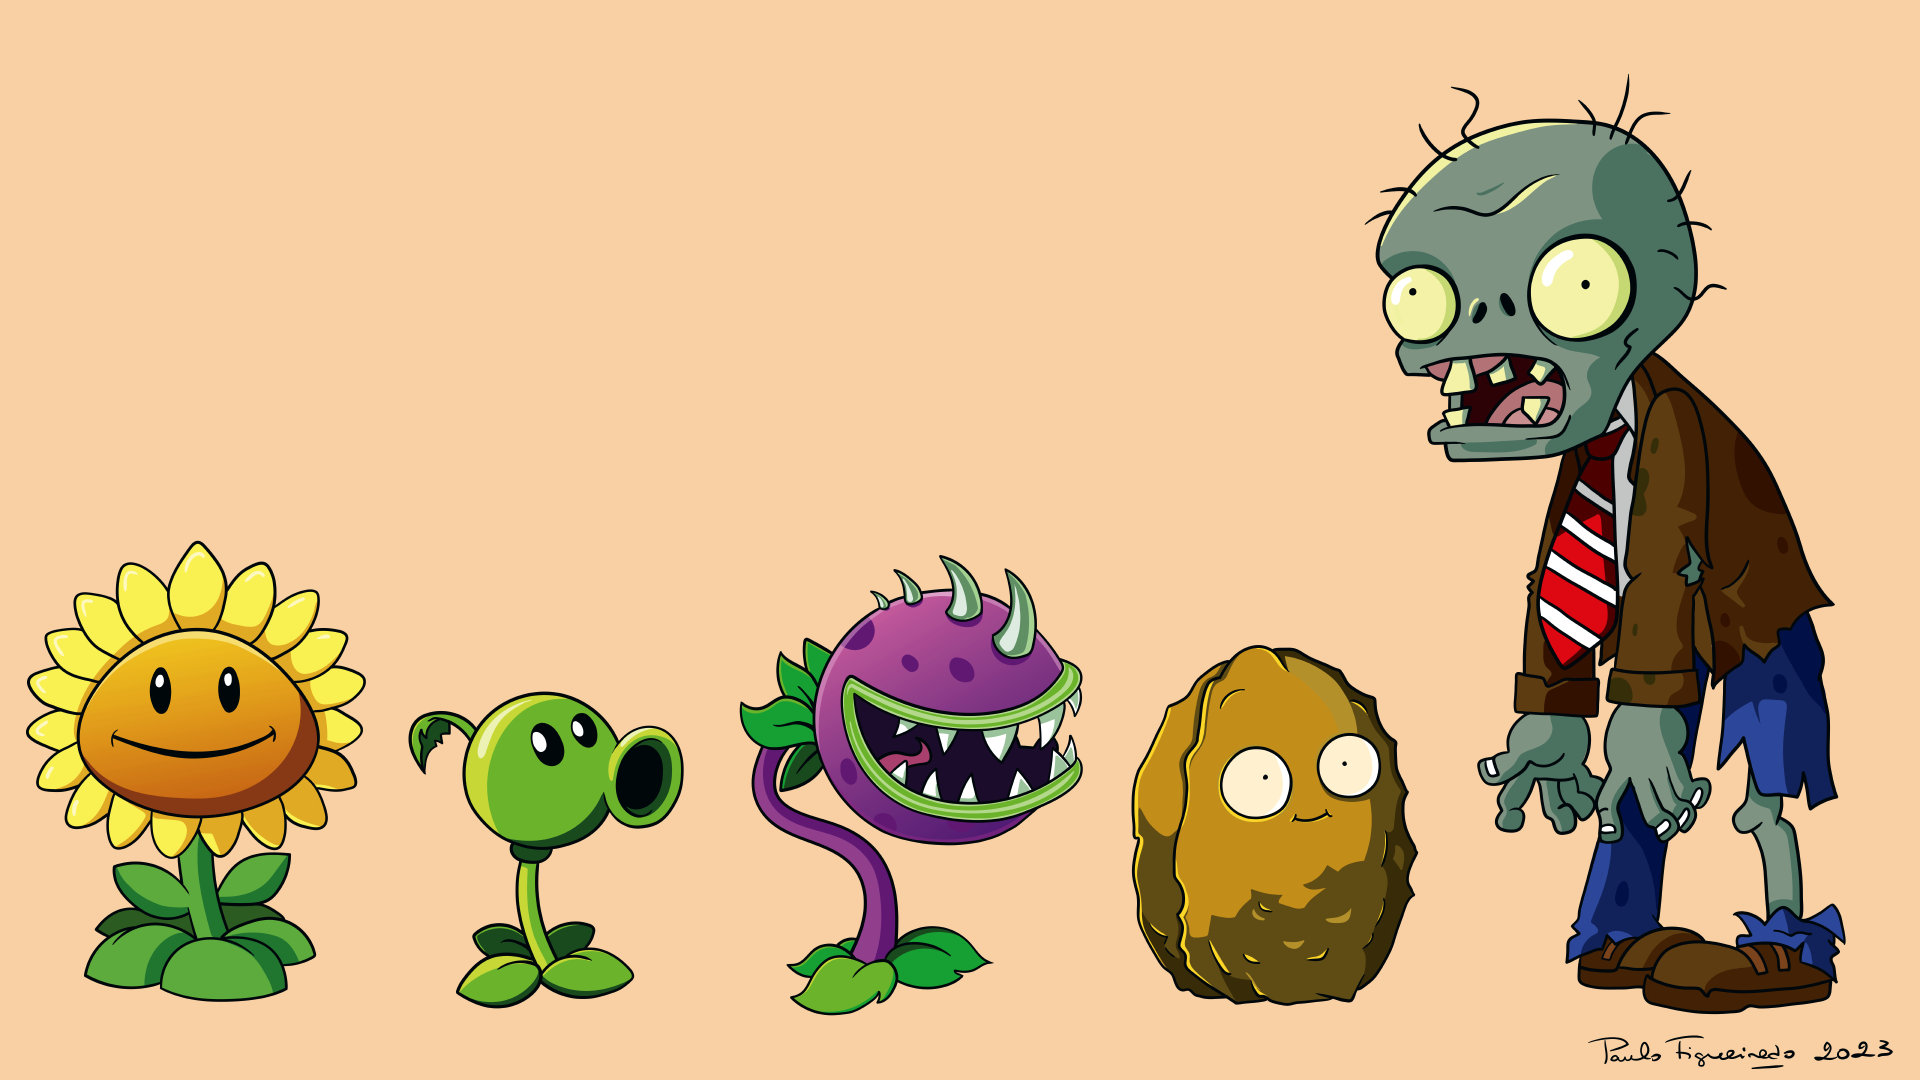 Plants vs Zombies 2 by Fistipuffs on DeviantArt